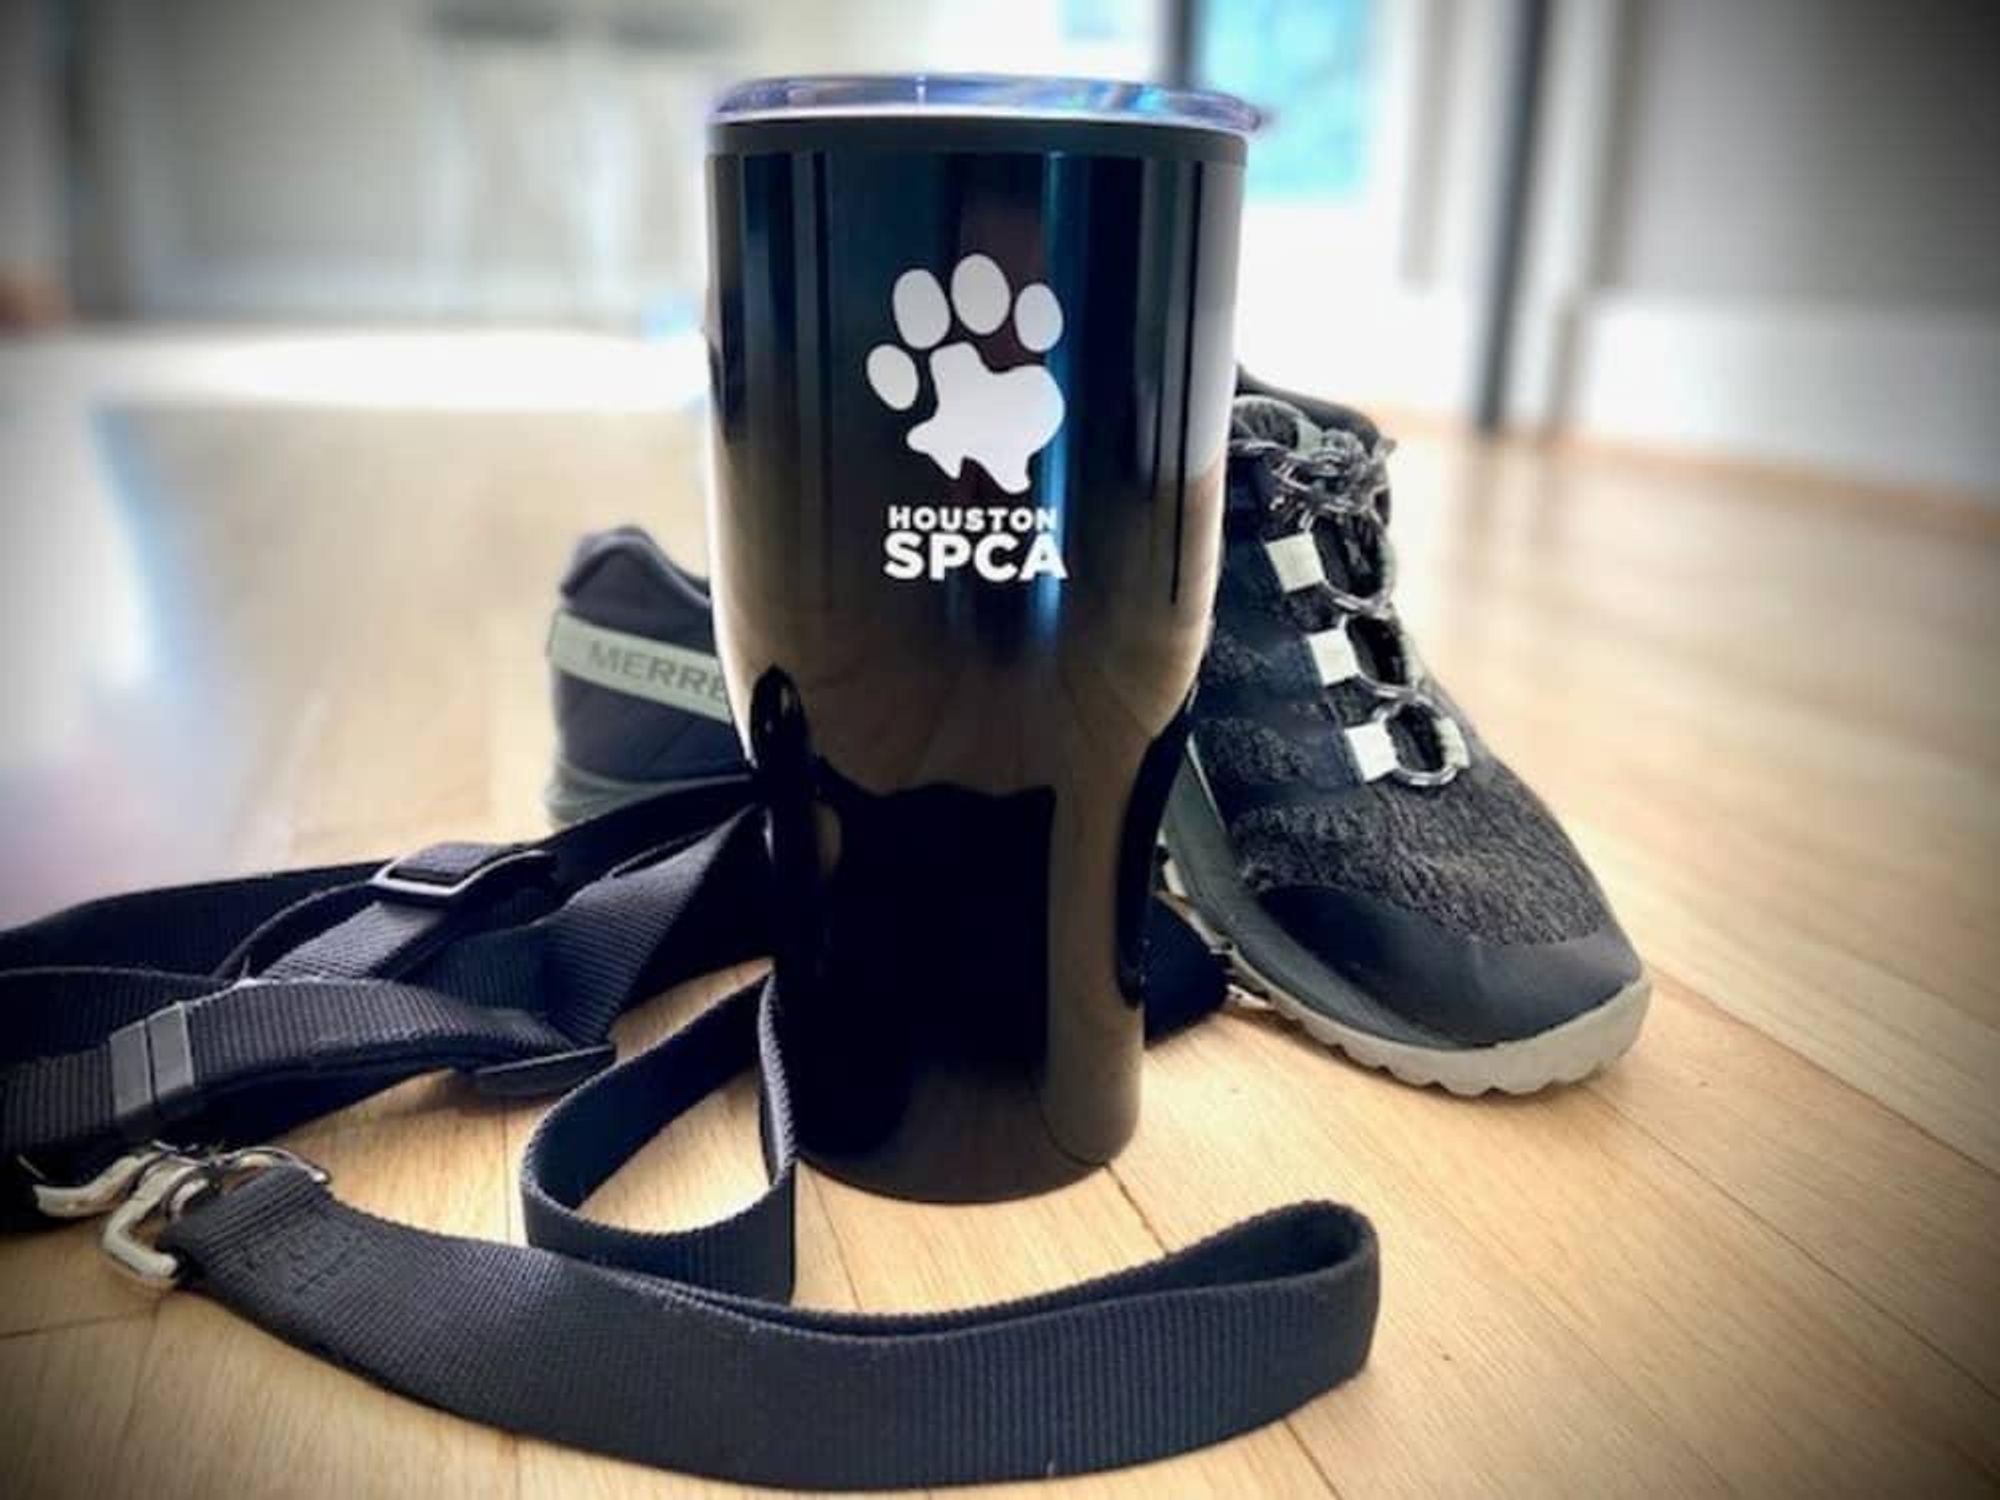 Houston SPCA cup and sneakers